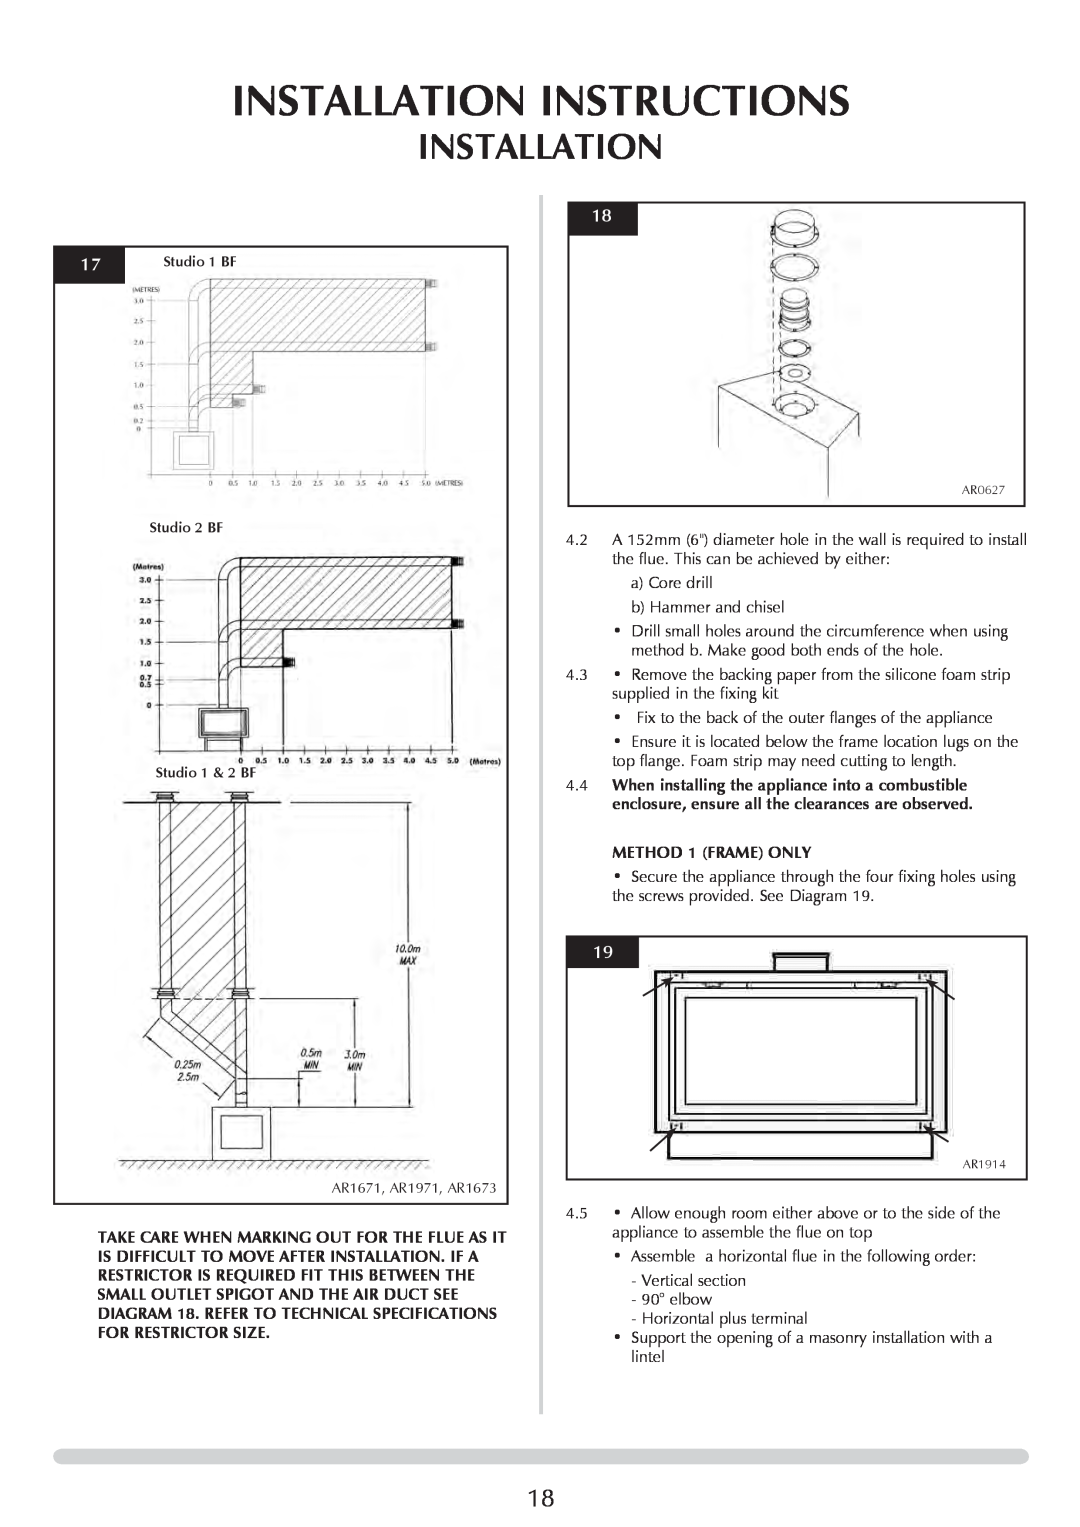 Stovax PR0919 manual Installation Instructions, METHOD 1 FRAME ONLY 